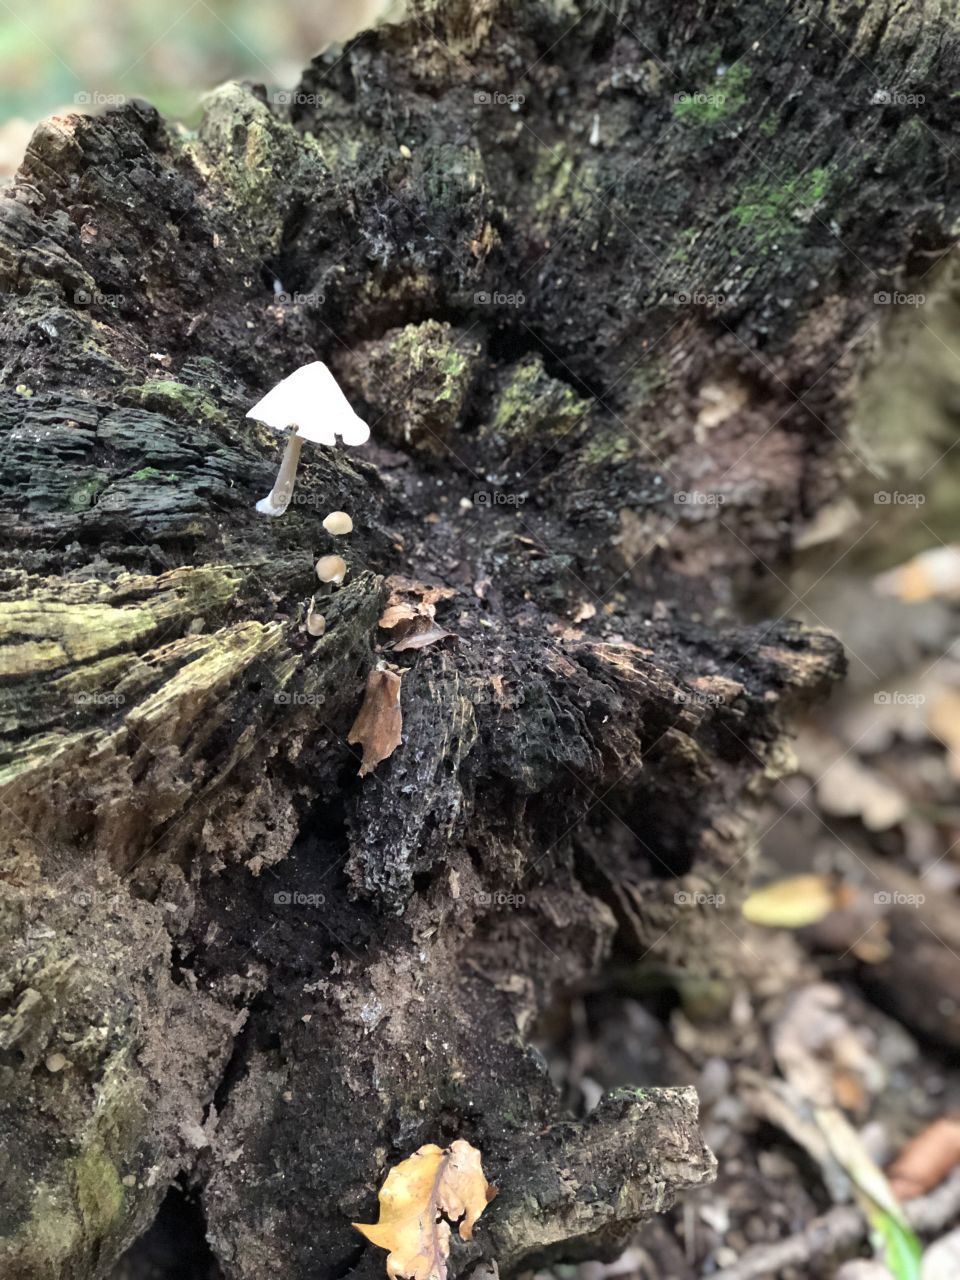 Mushroom in the middle of a broken tree